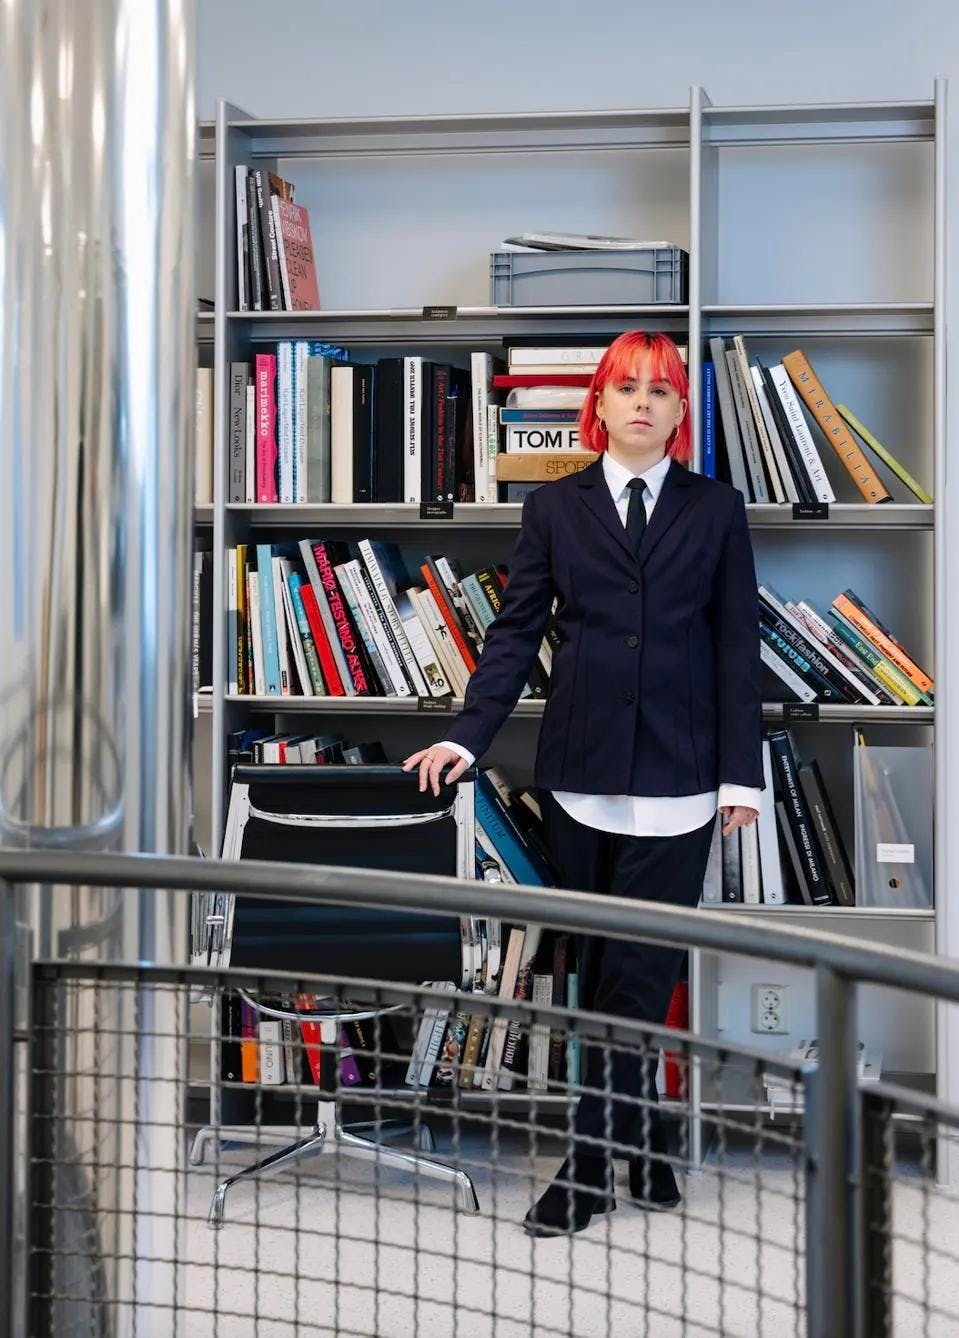 Inside Oslo’s International Library Of Fashion Research, Where Forgotten Printed Matter Is Treasured